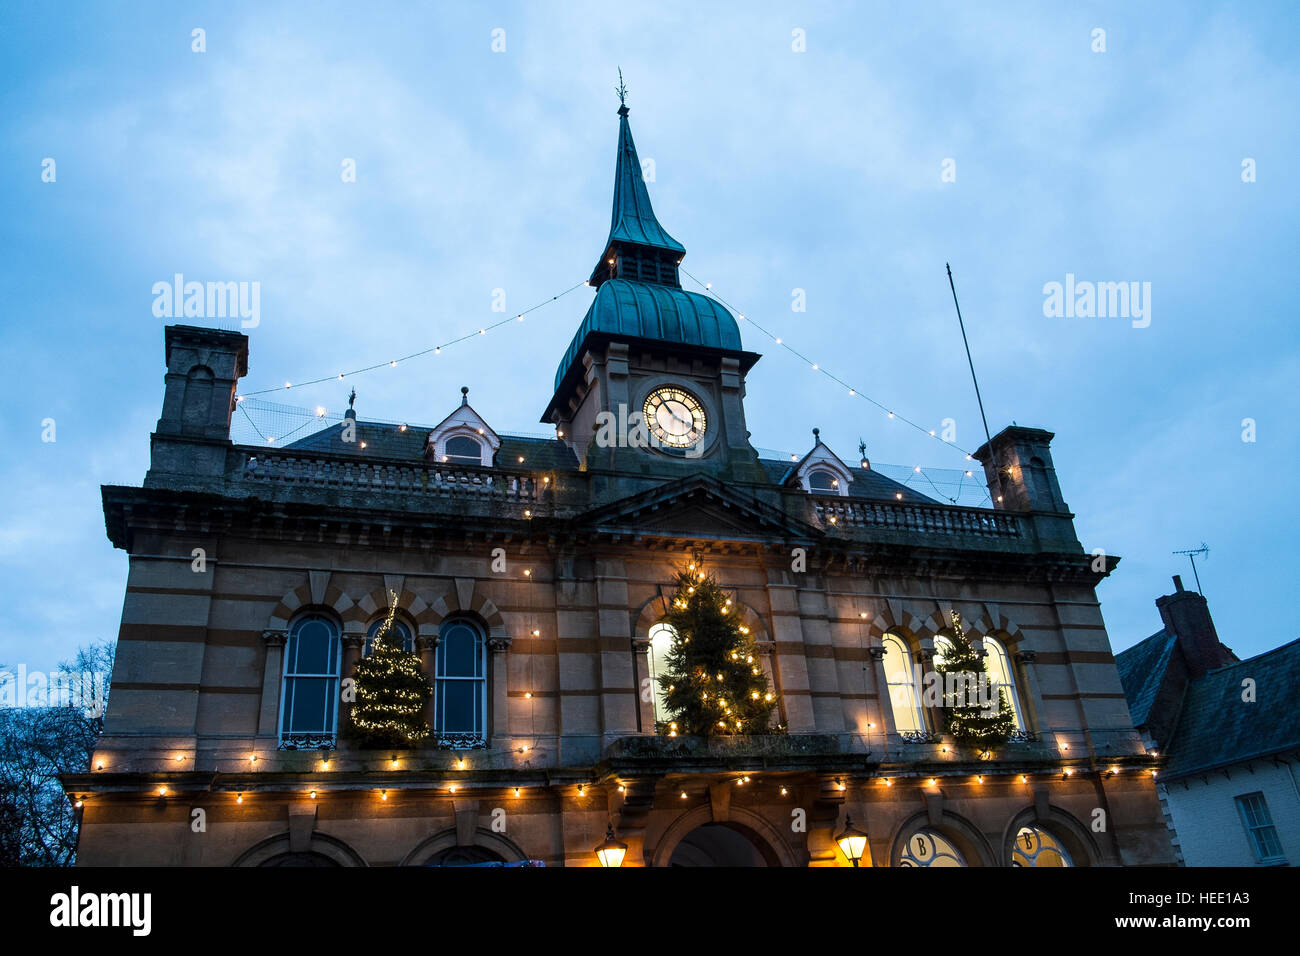 Towcester town hall seen at dusk with decorations over the Christmas period Stock Photo